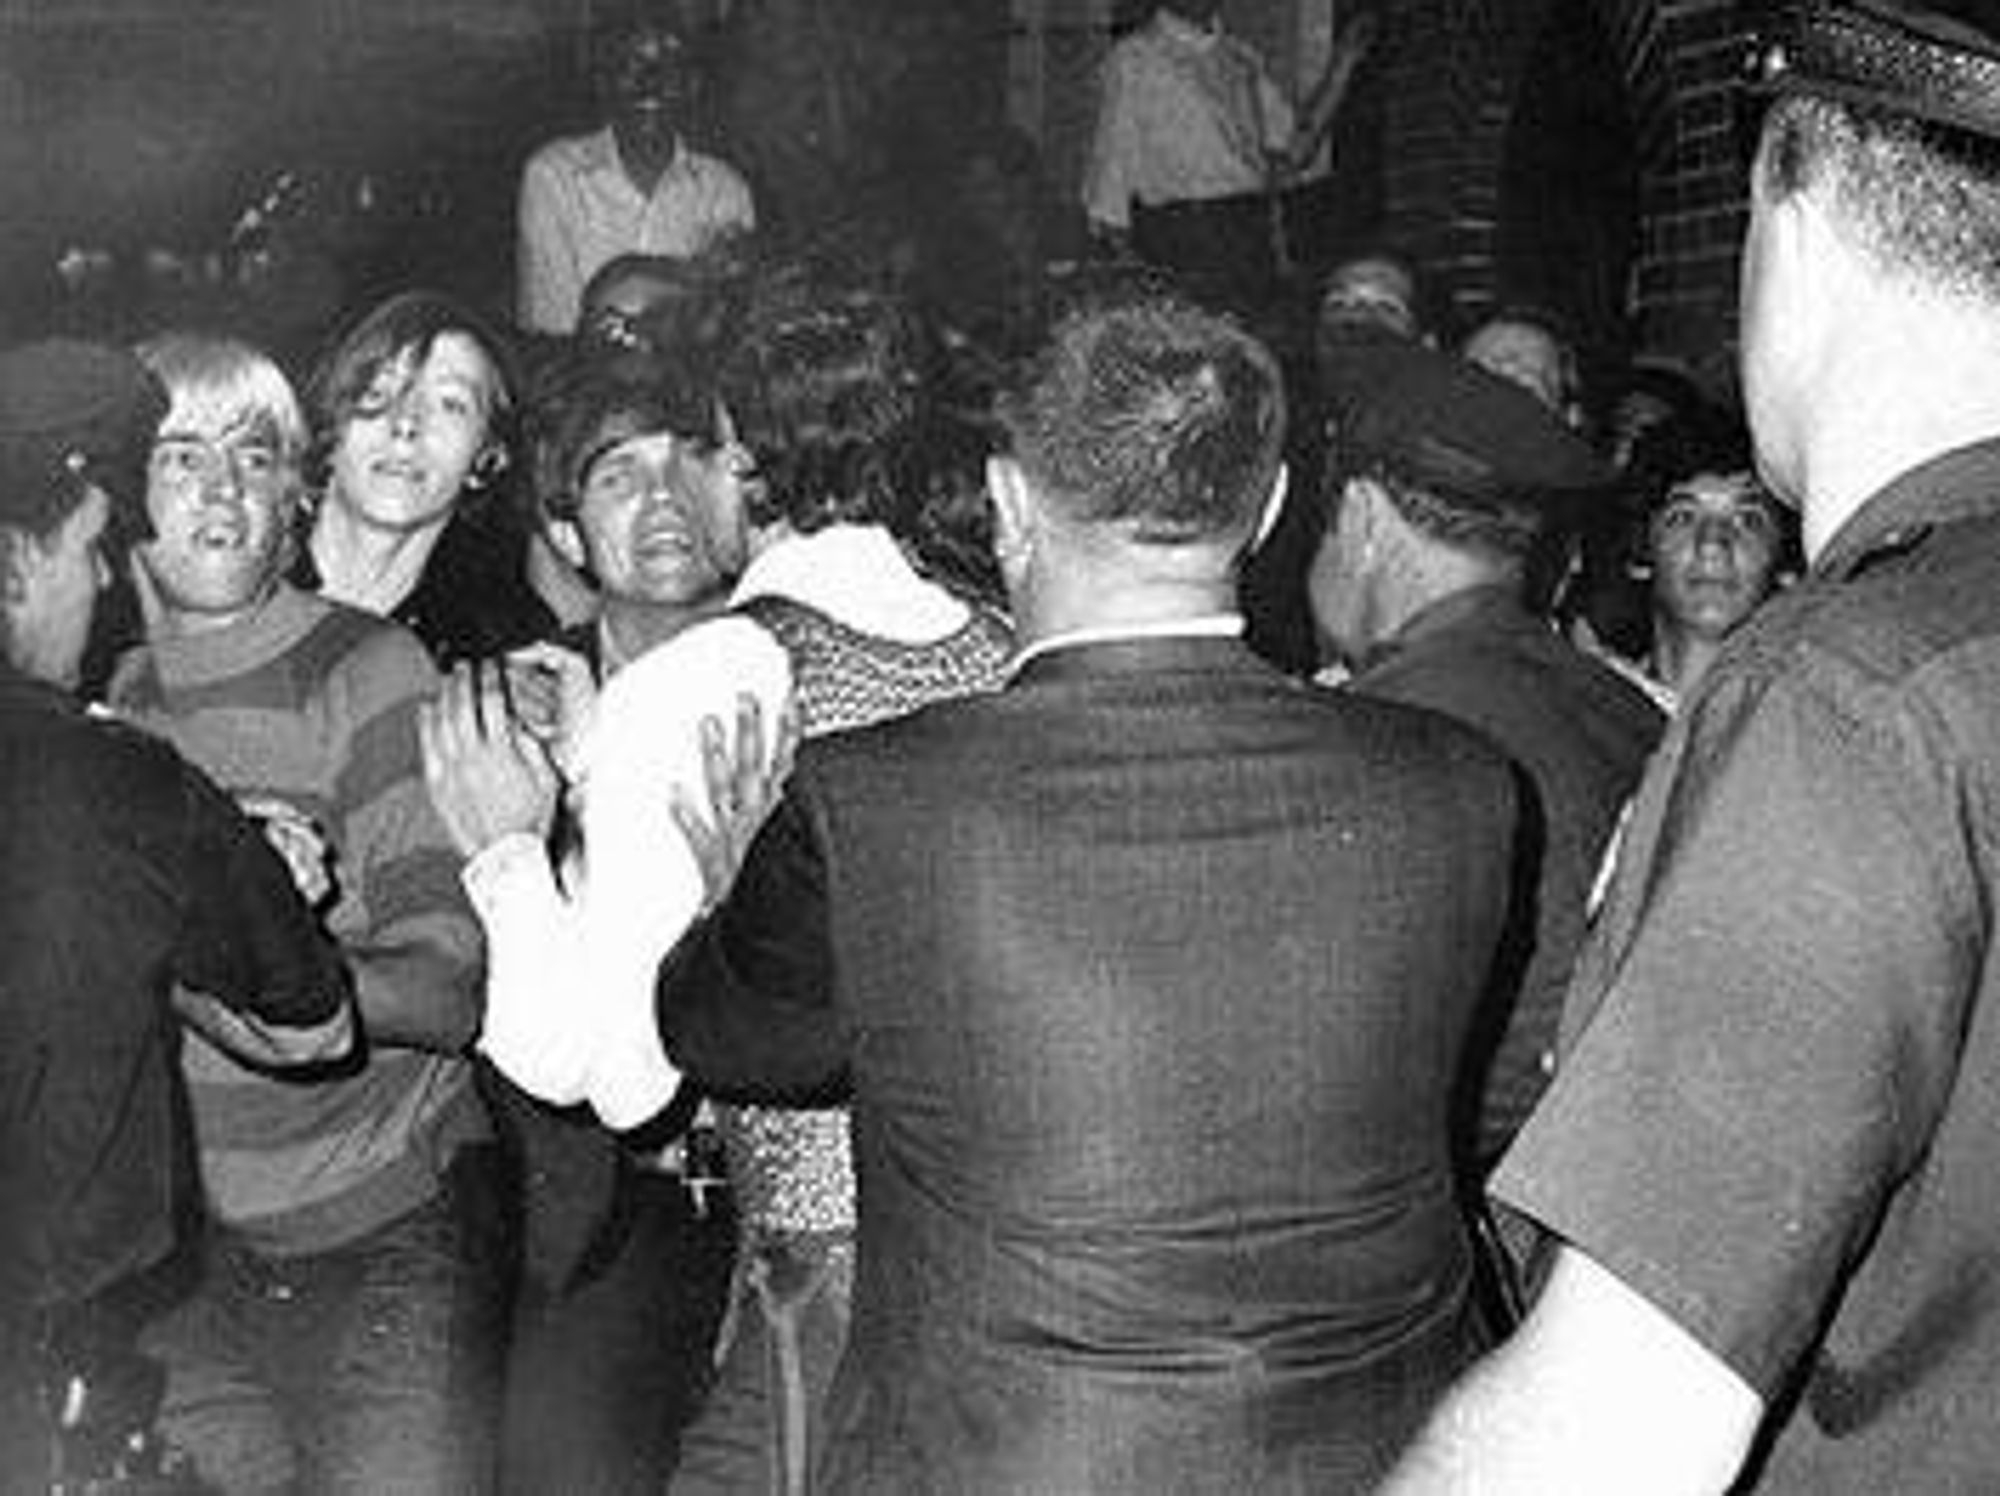 The only known photograph taken during the first night of riots, by freelance photographer Joseph Ambrosini, shows gay youth scuffling with police.